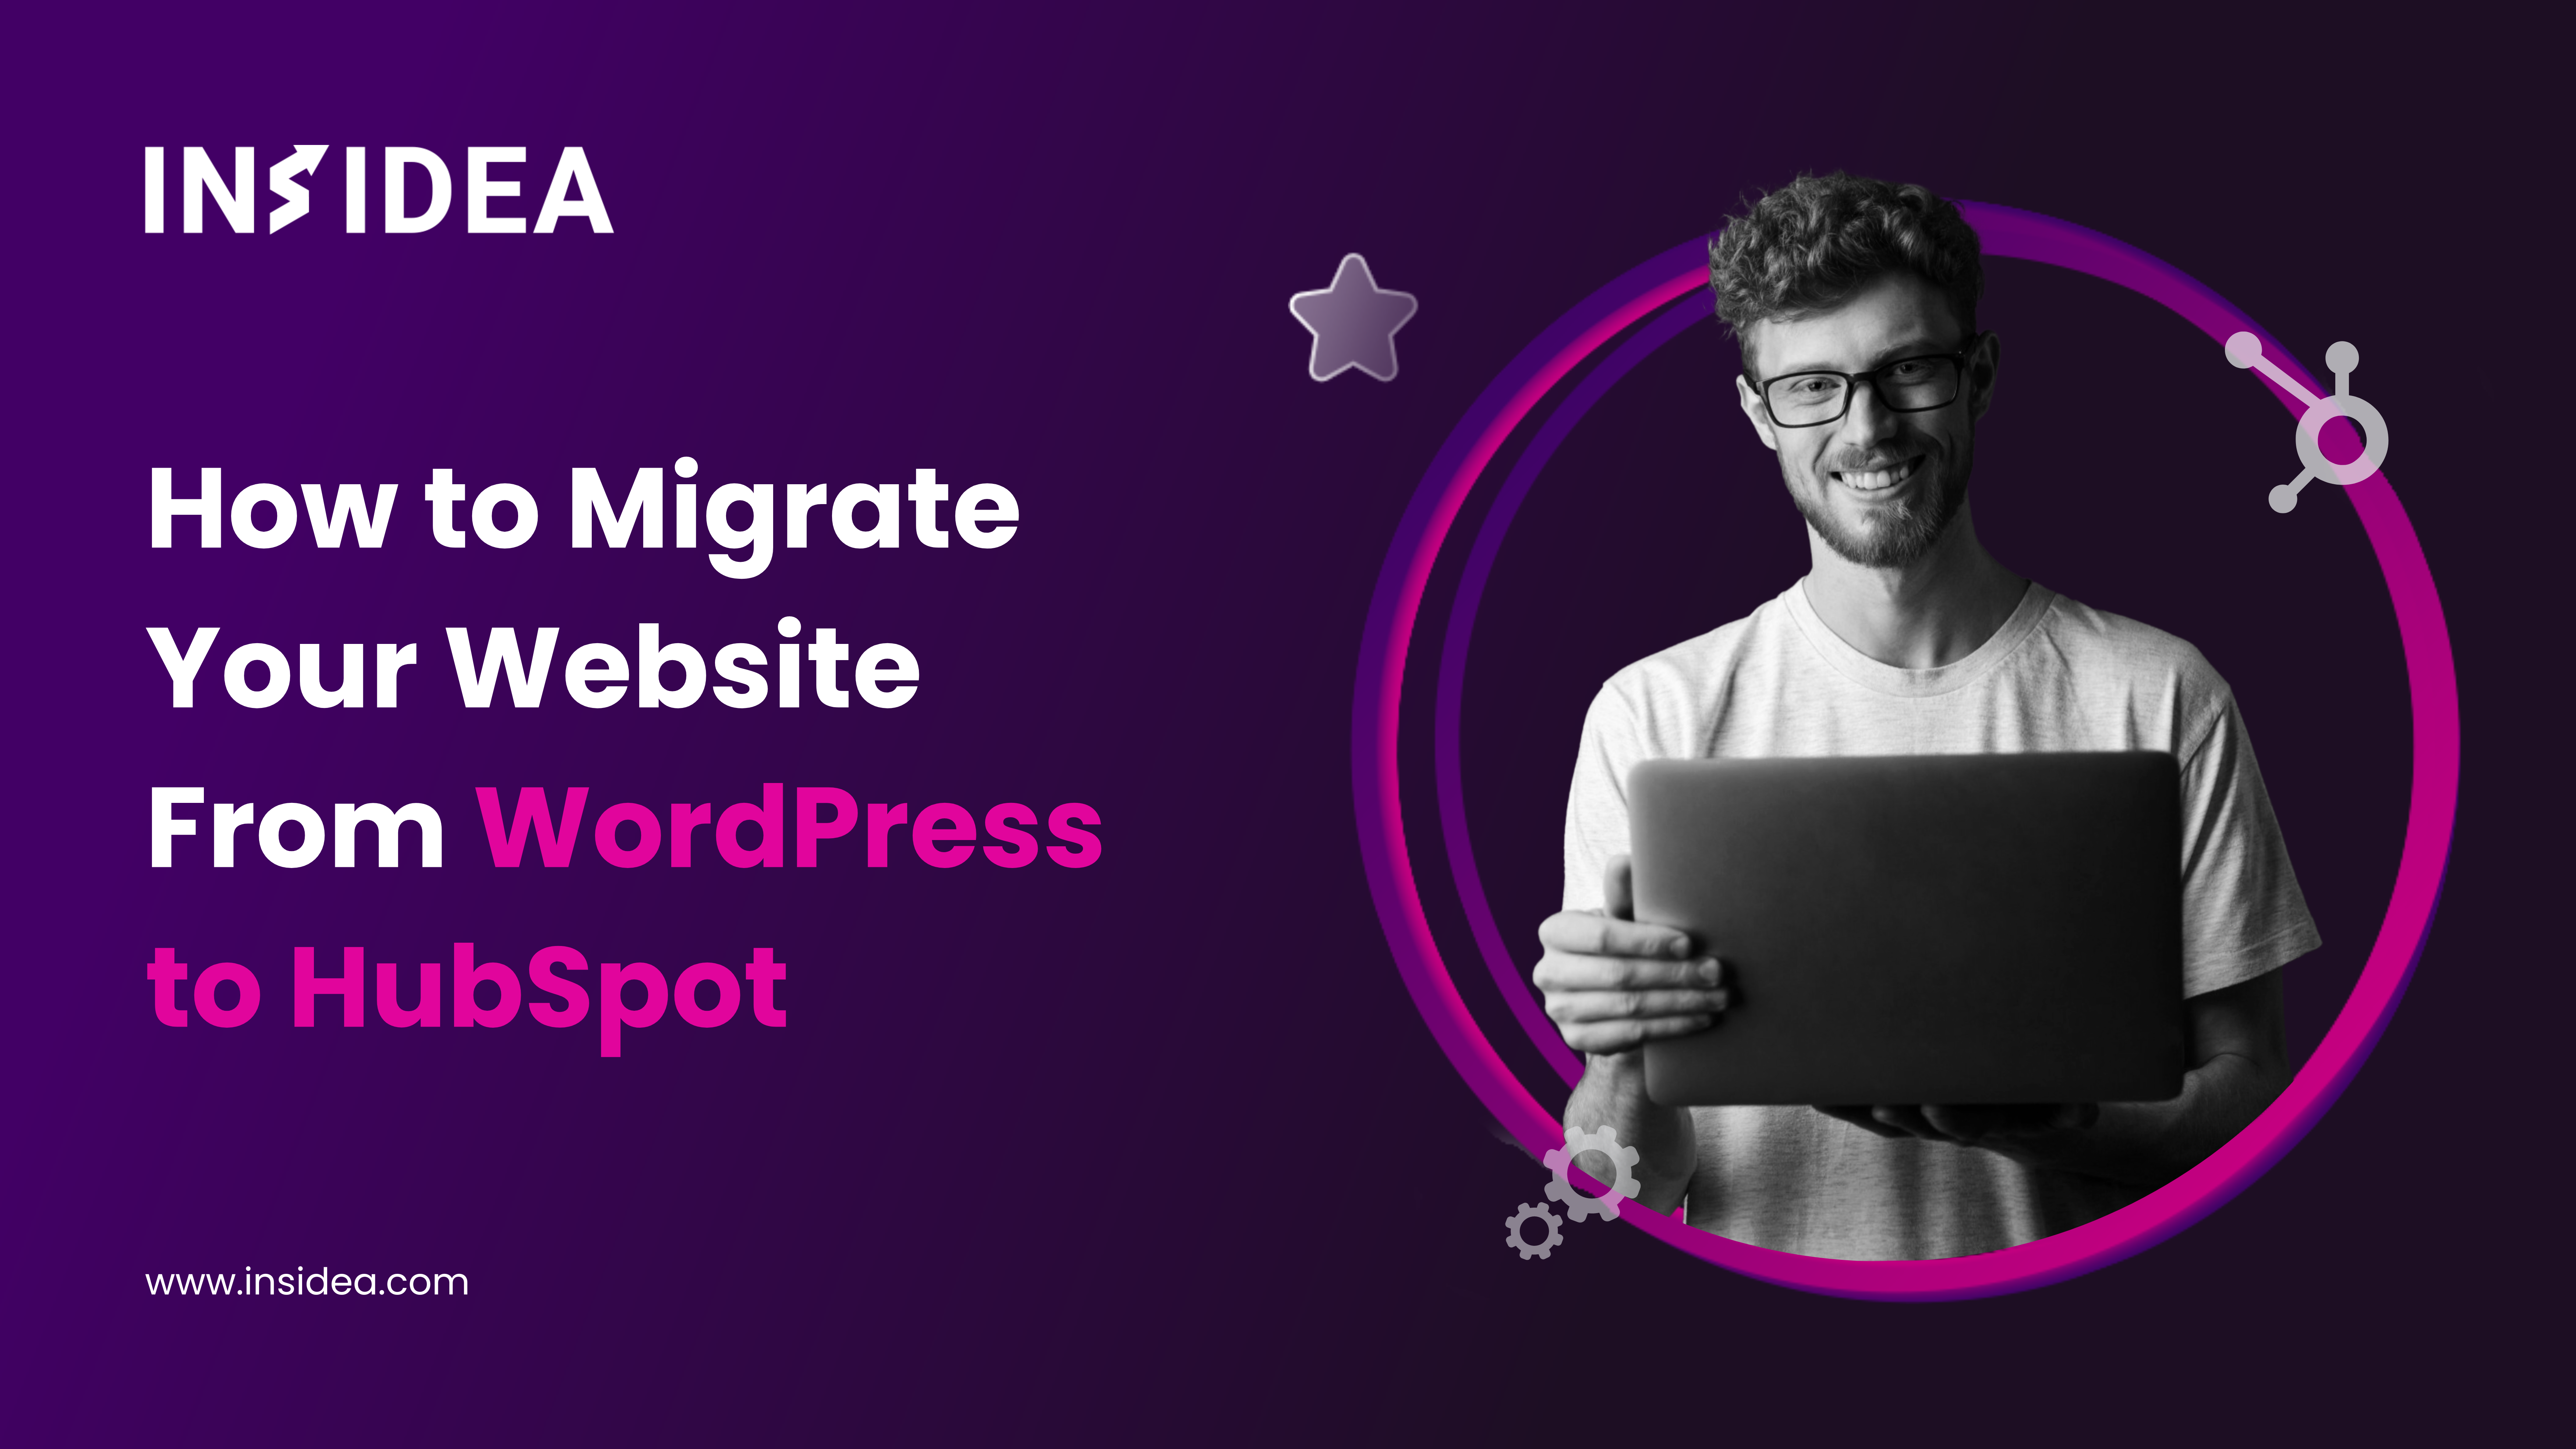 How to Migrate Your Website From WordPress to HubSpot